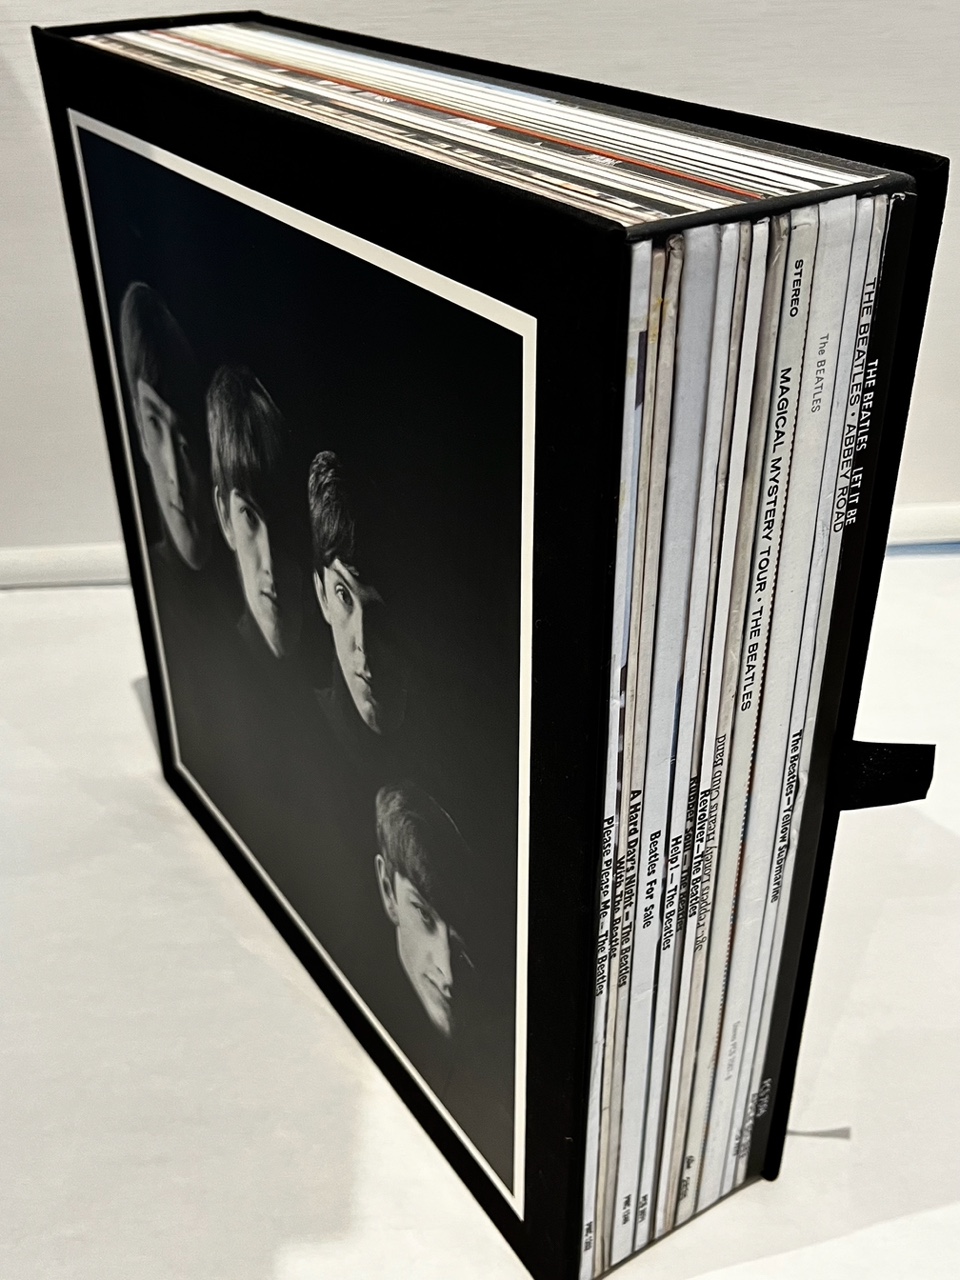 Beatles Box of Vision – Revisited | Beatles Blog